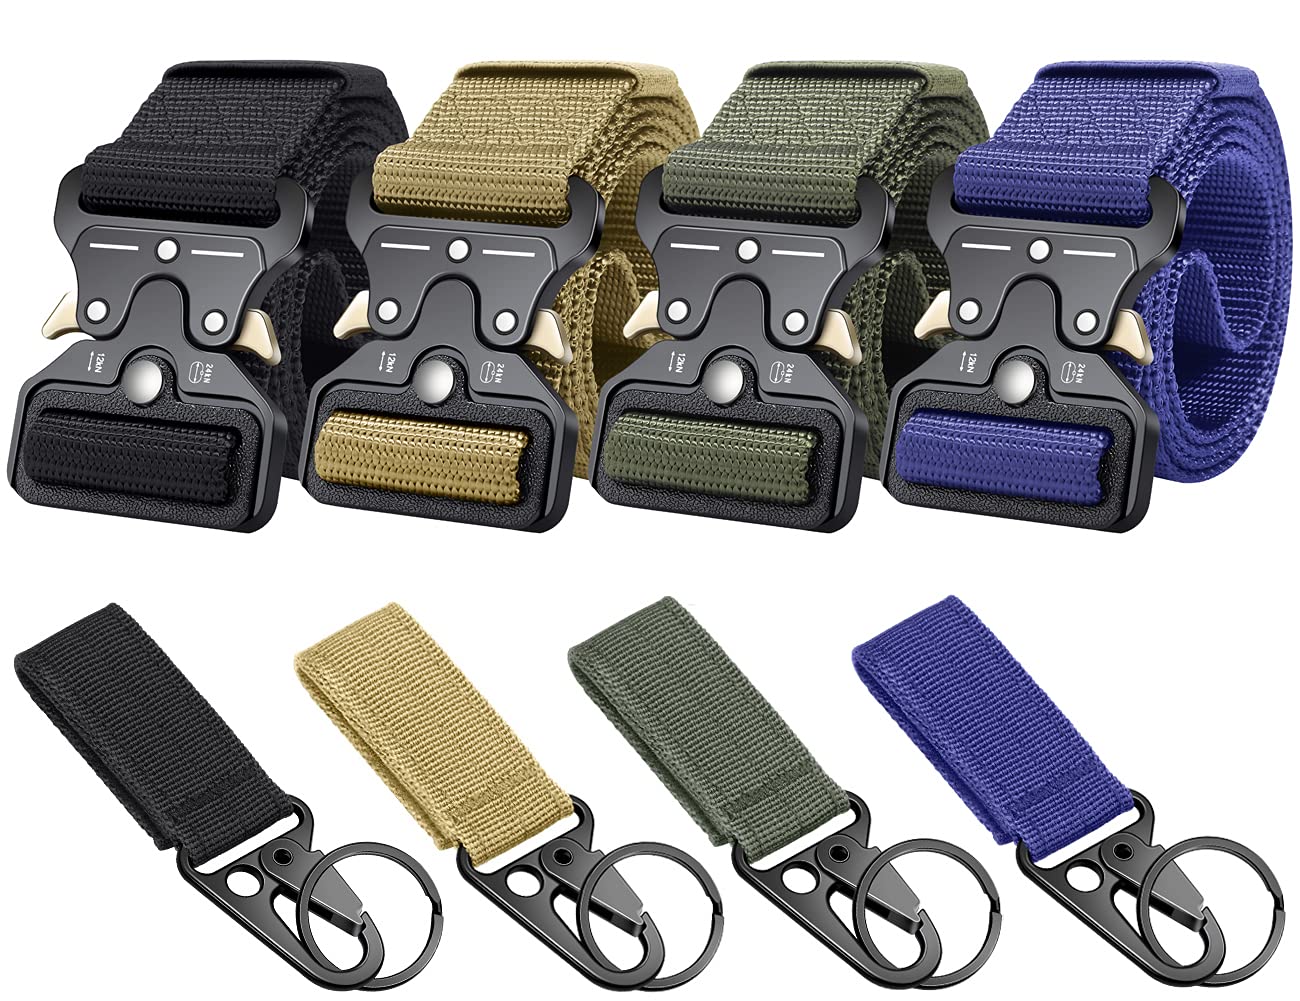 Ginwee 4-Pack Tactical Belt, $20.79 Amazon Military, Riggers Belts for Men, Heavy-Duty Quick-Release Metal Buckle with Extra Molle Key Ring Holder Gears f/s prime exclusive